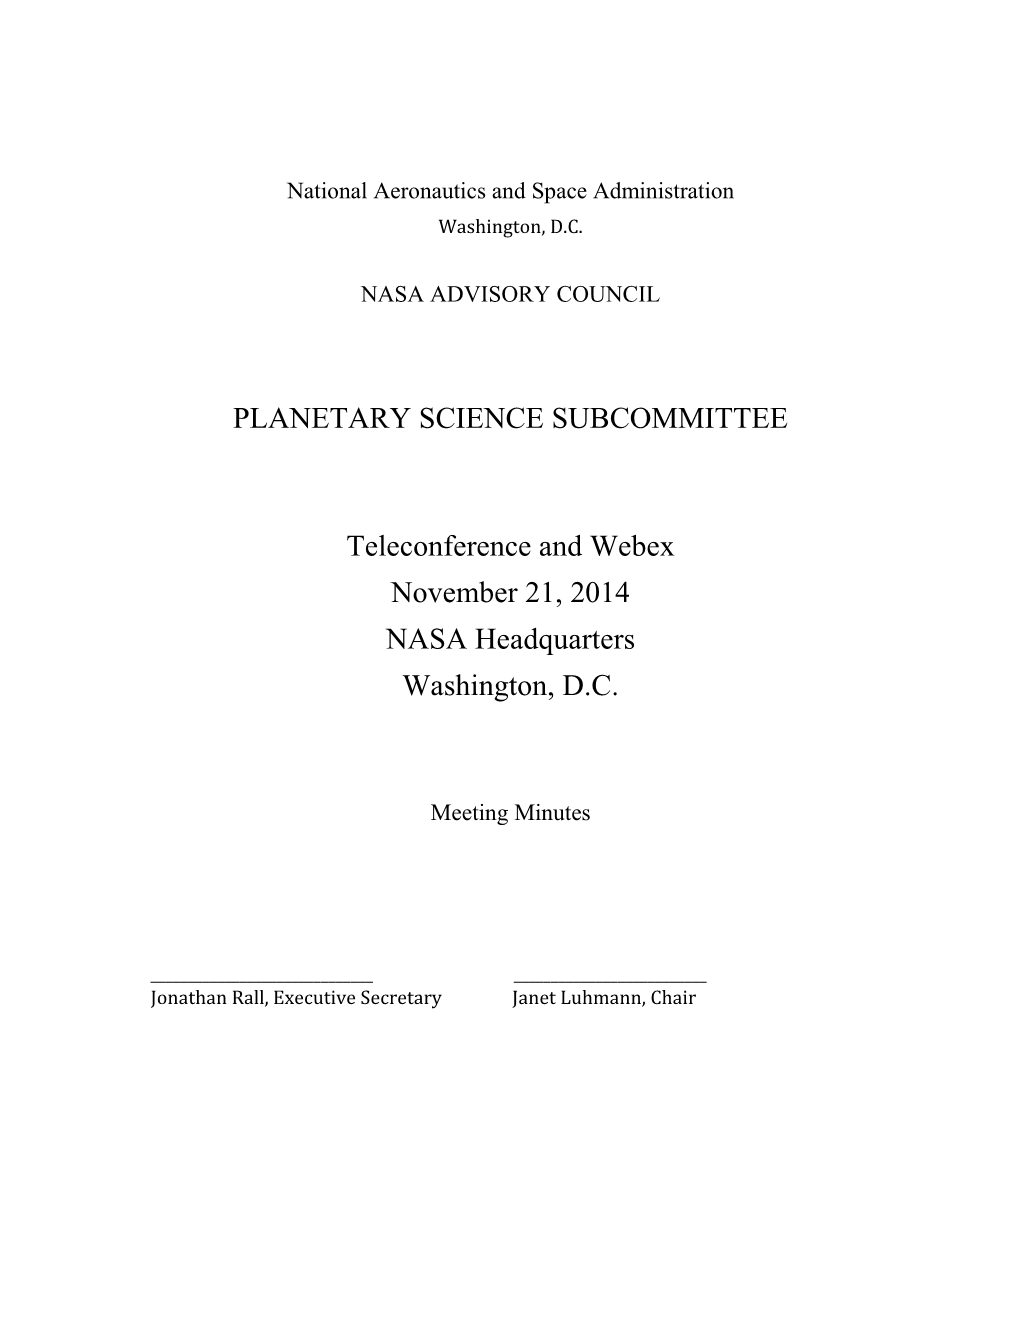 PLANETARY SCIENCE SUBCOMMITTEE Teleconference